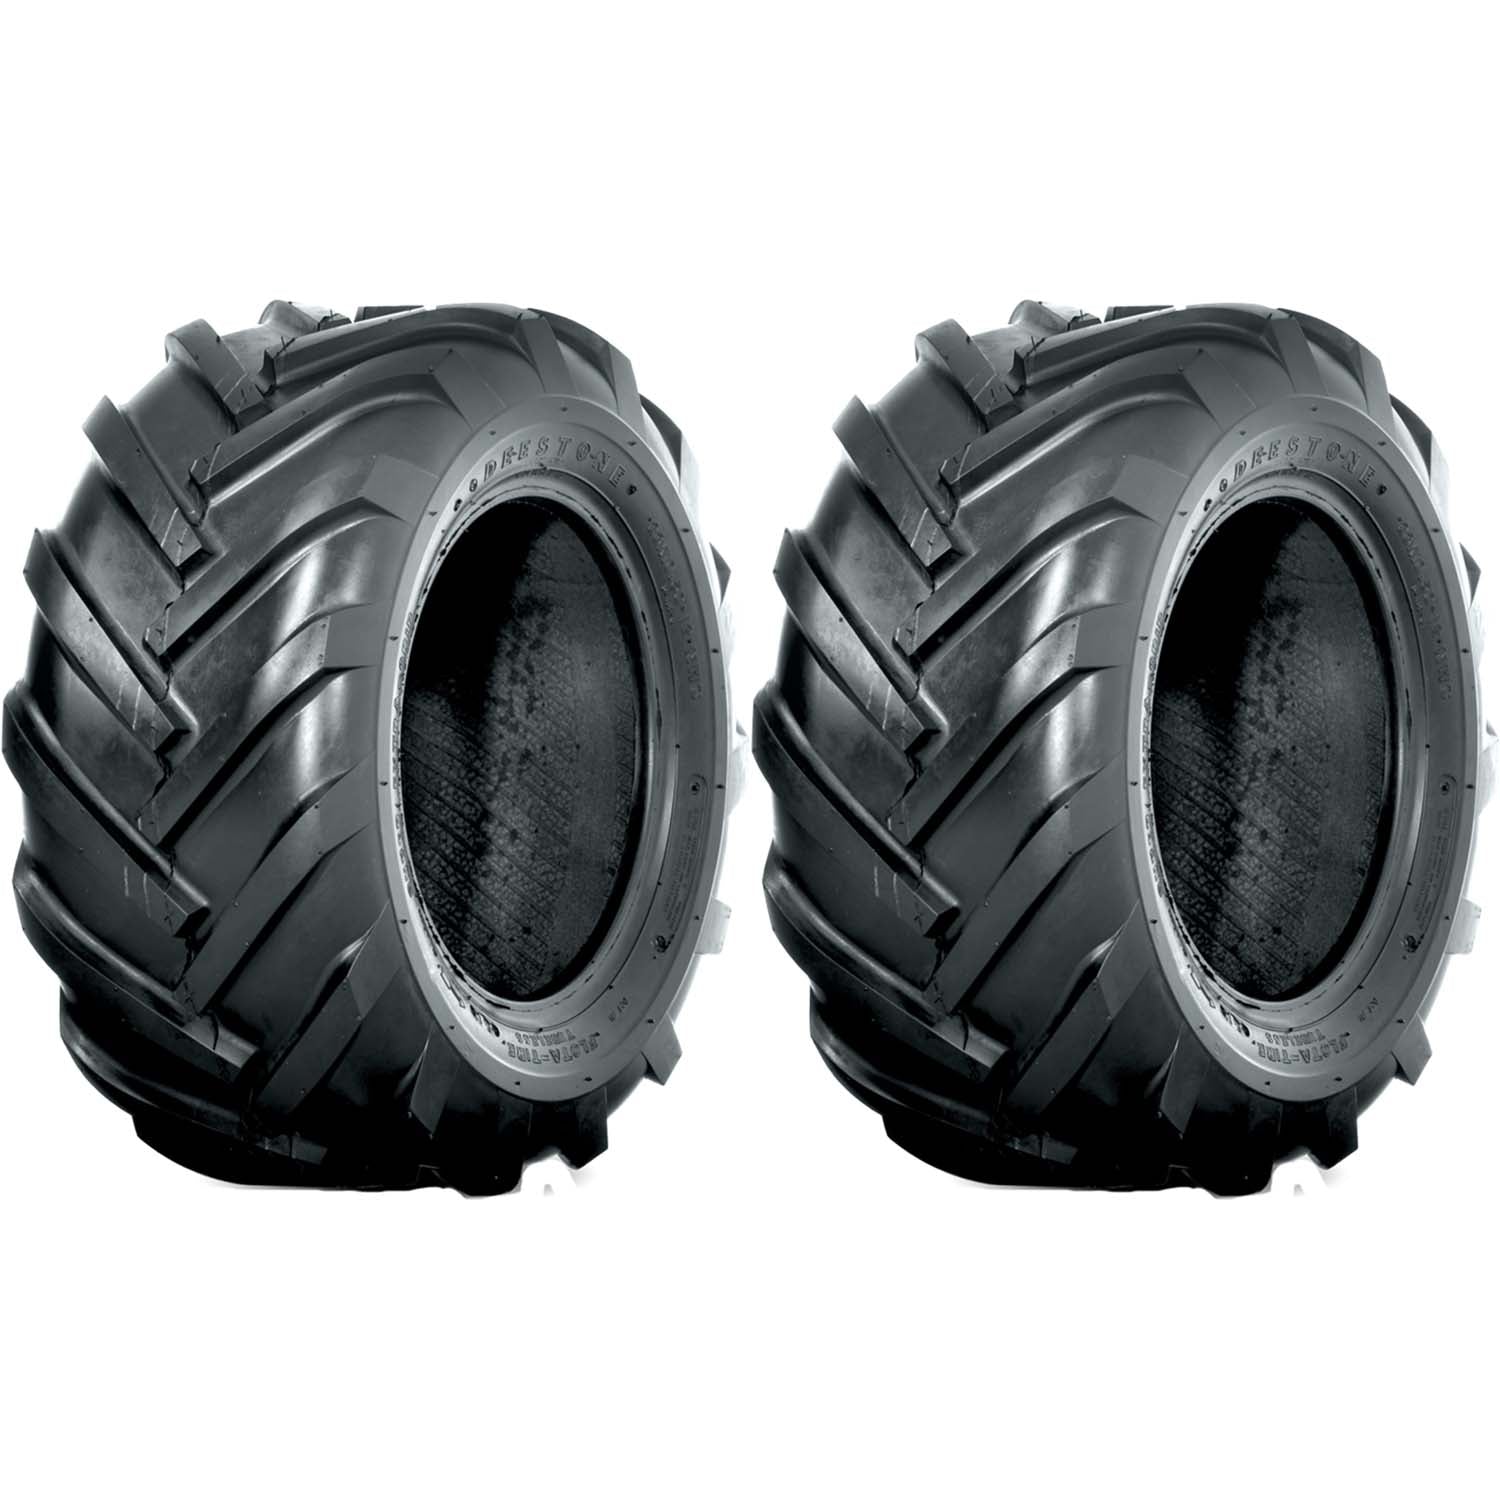 Deestone D405 Lug Tractor Tire 6ply 23x10.50-12 - Pack of 2